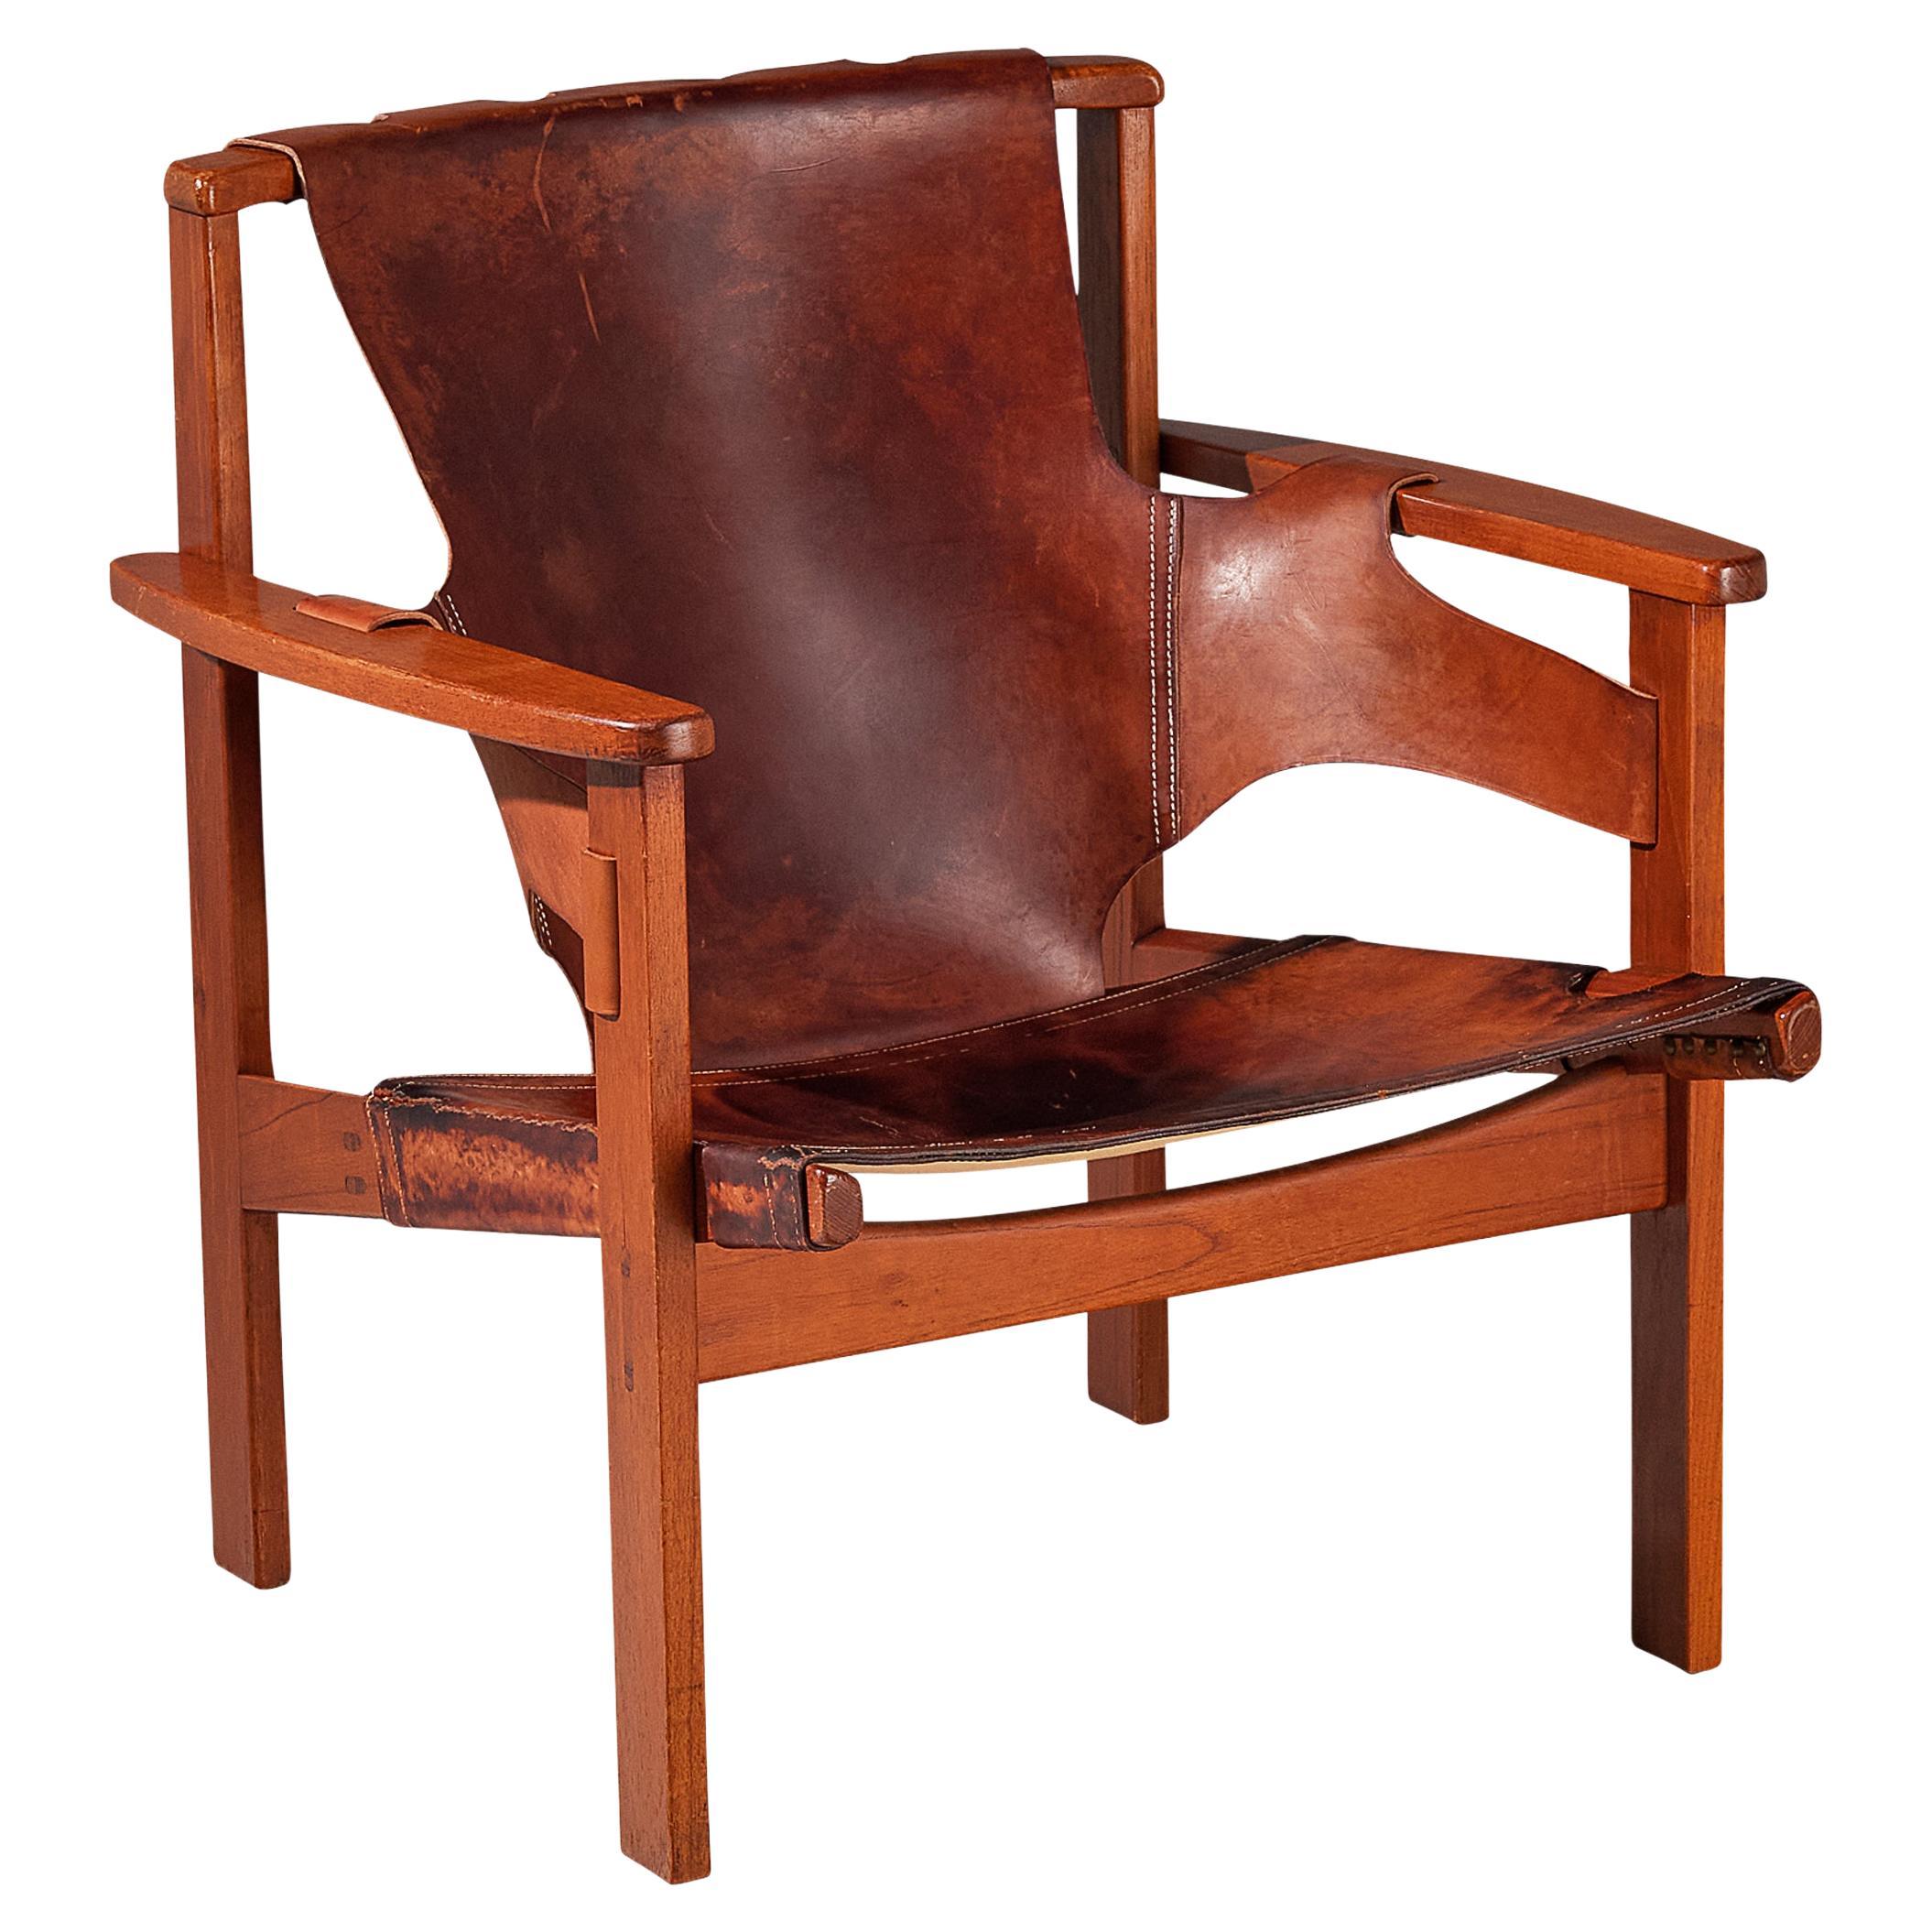 Carl-Axel Acking ‘Trienna’ Lounge Chair in Oak and Patinated Leather  For Sale